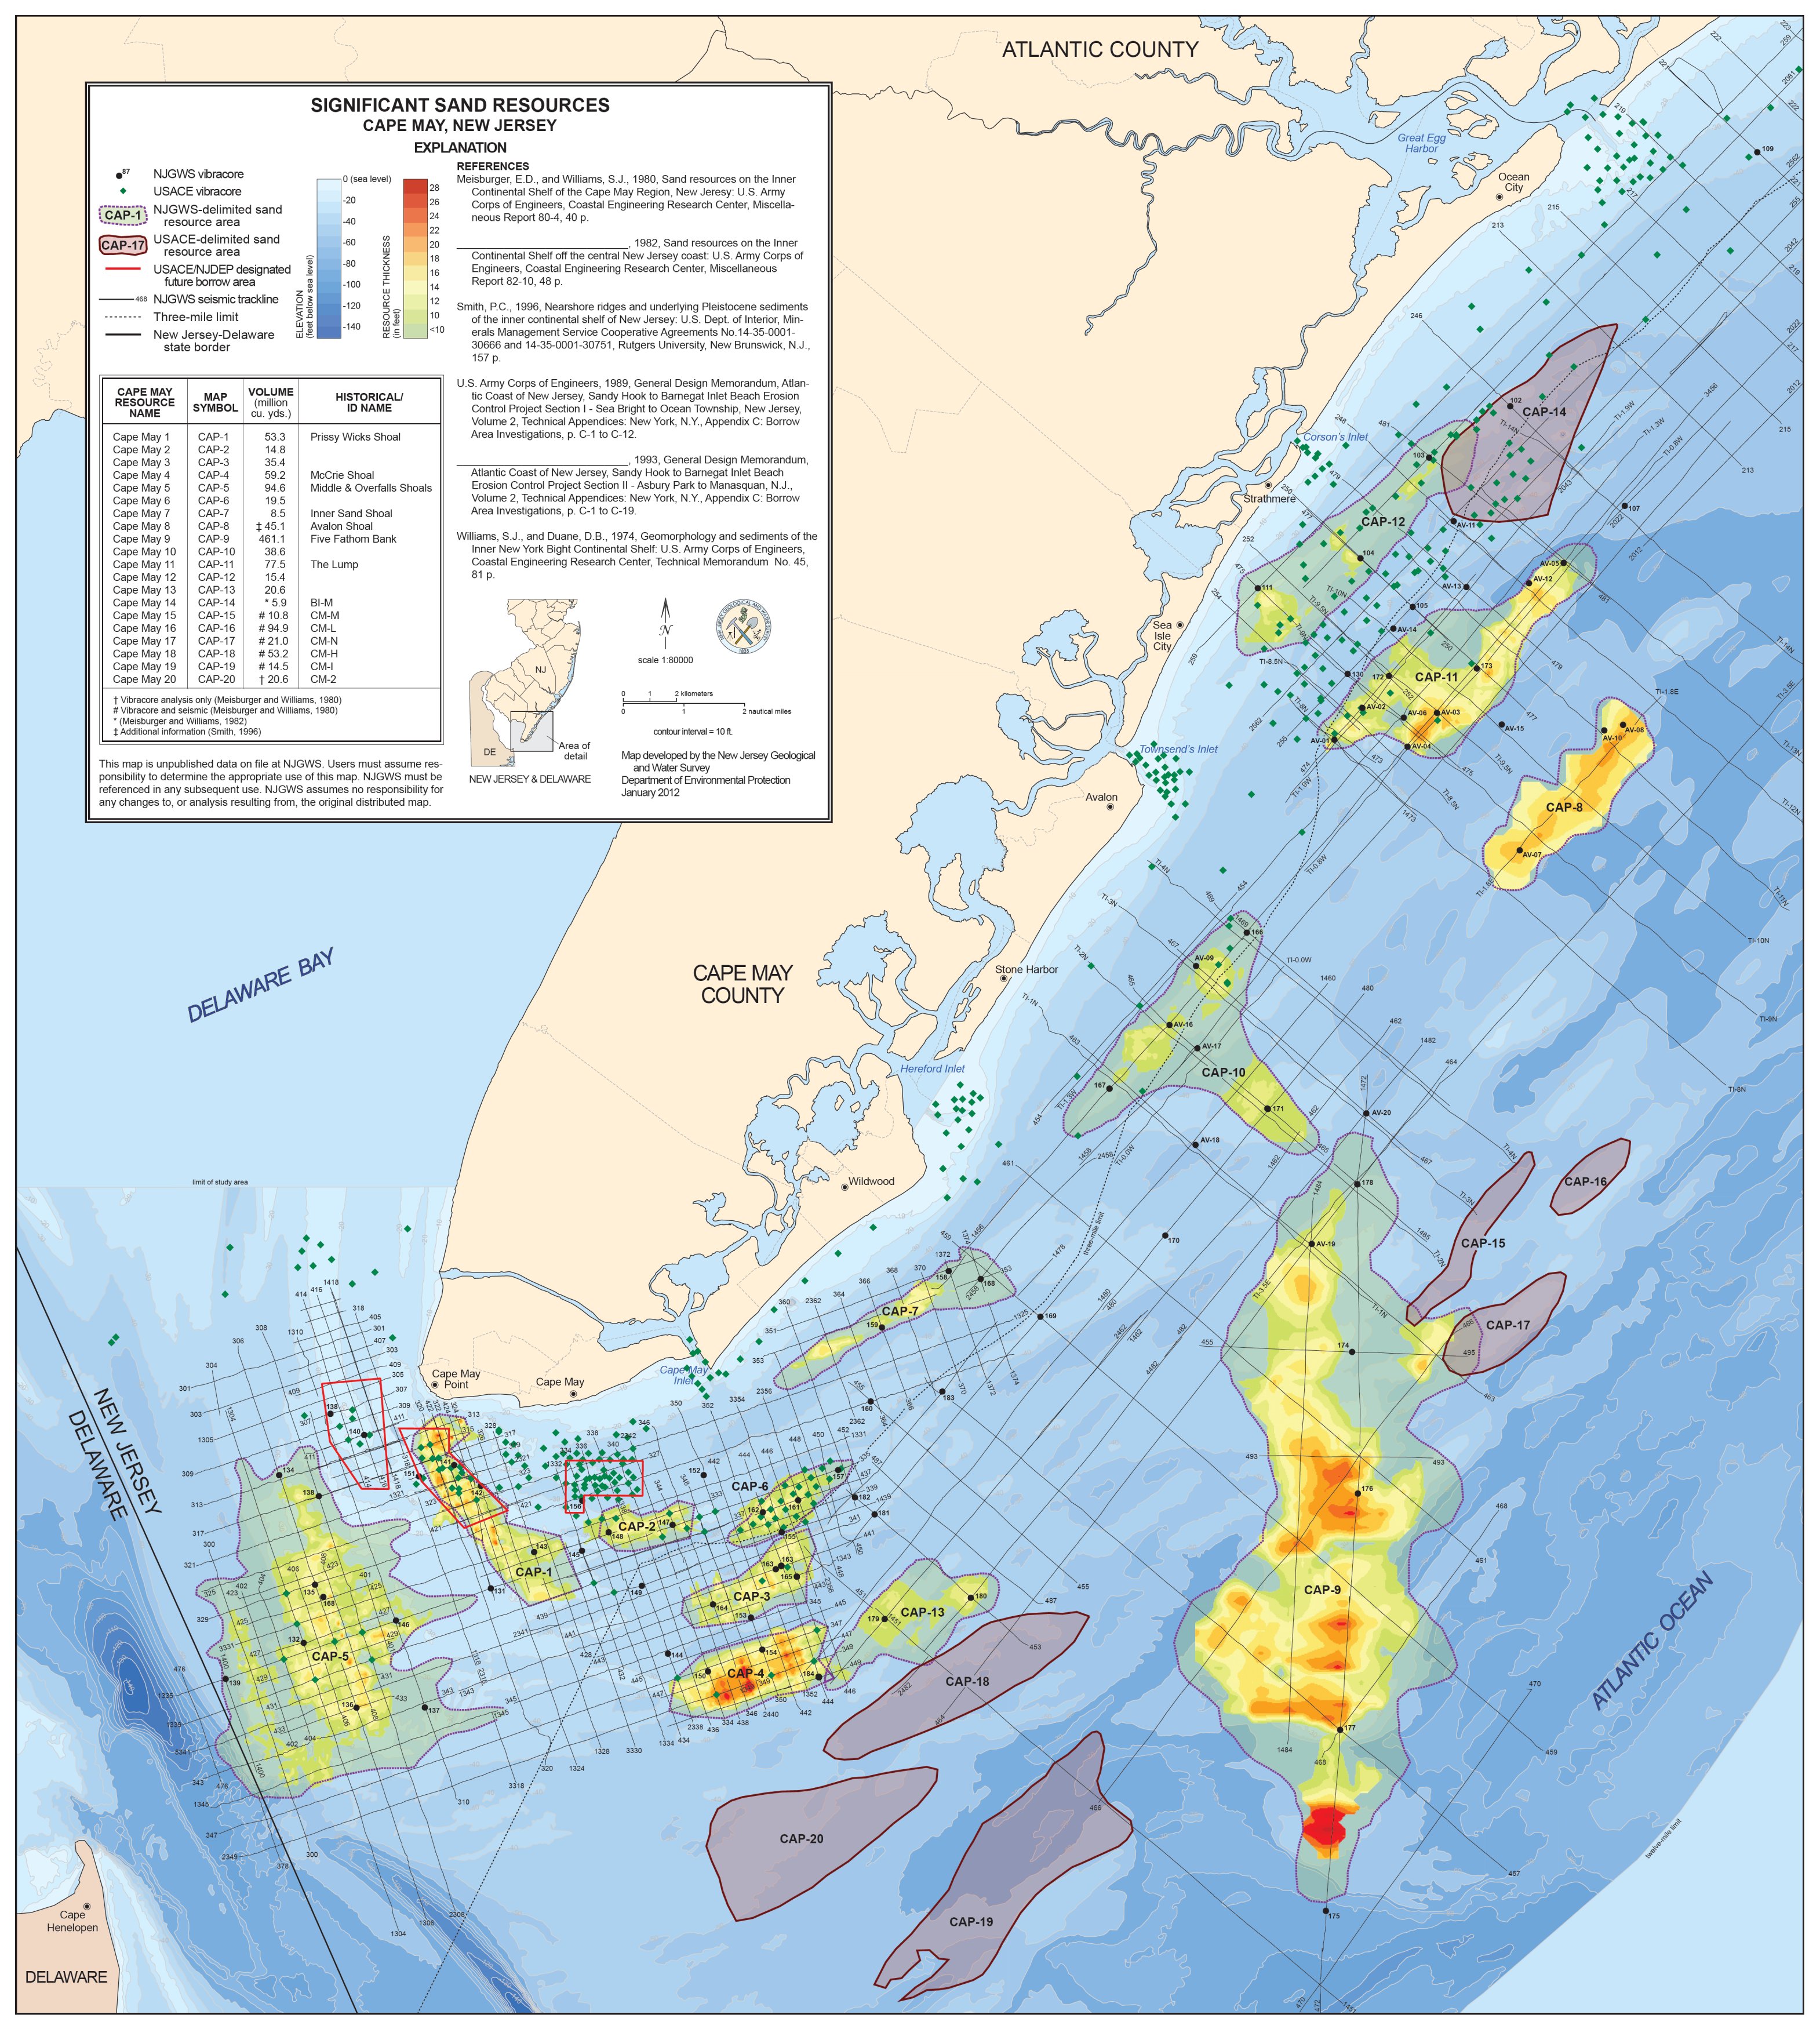 Significant Sand Resource Areas in State and Federal Waters fshore New Jersey 2012